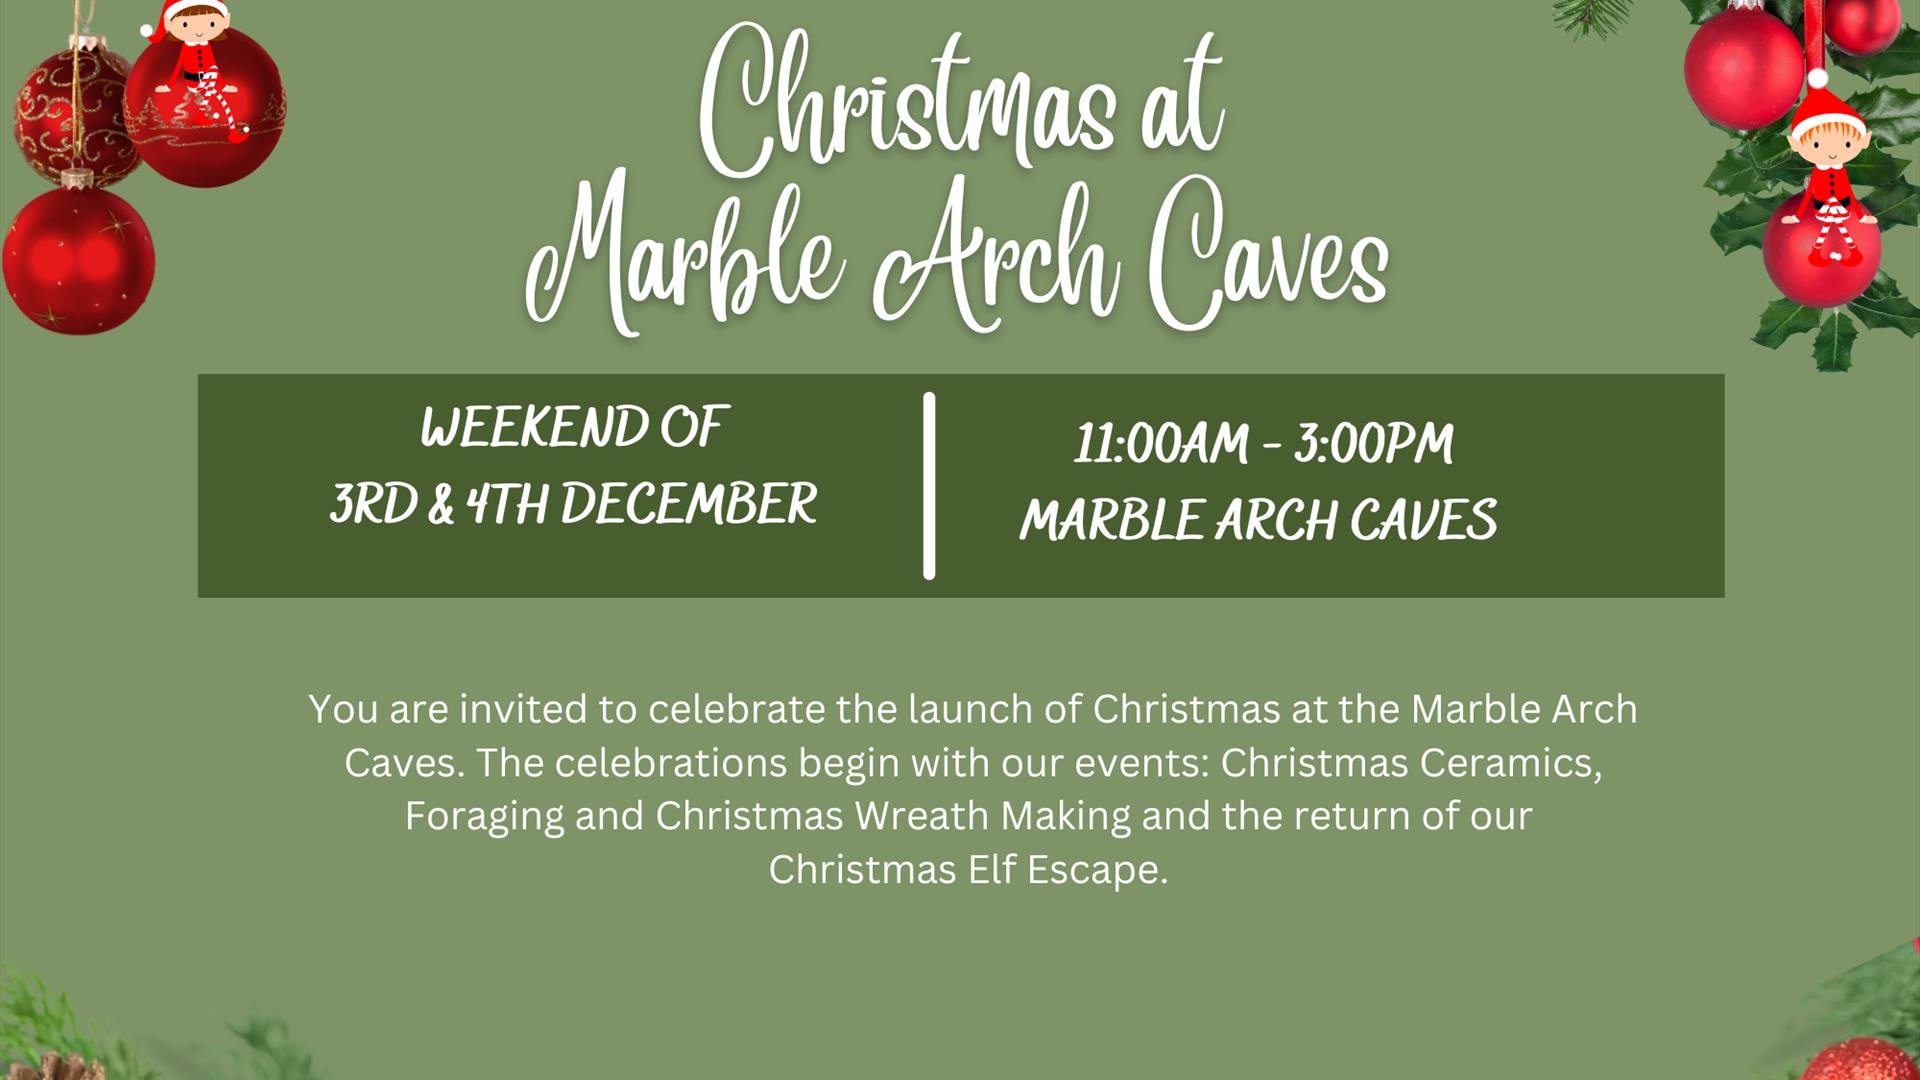 Christmas at Marble Arch Caves